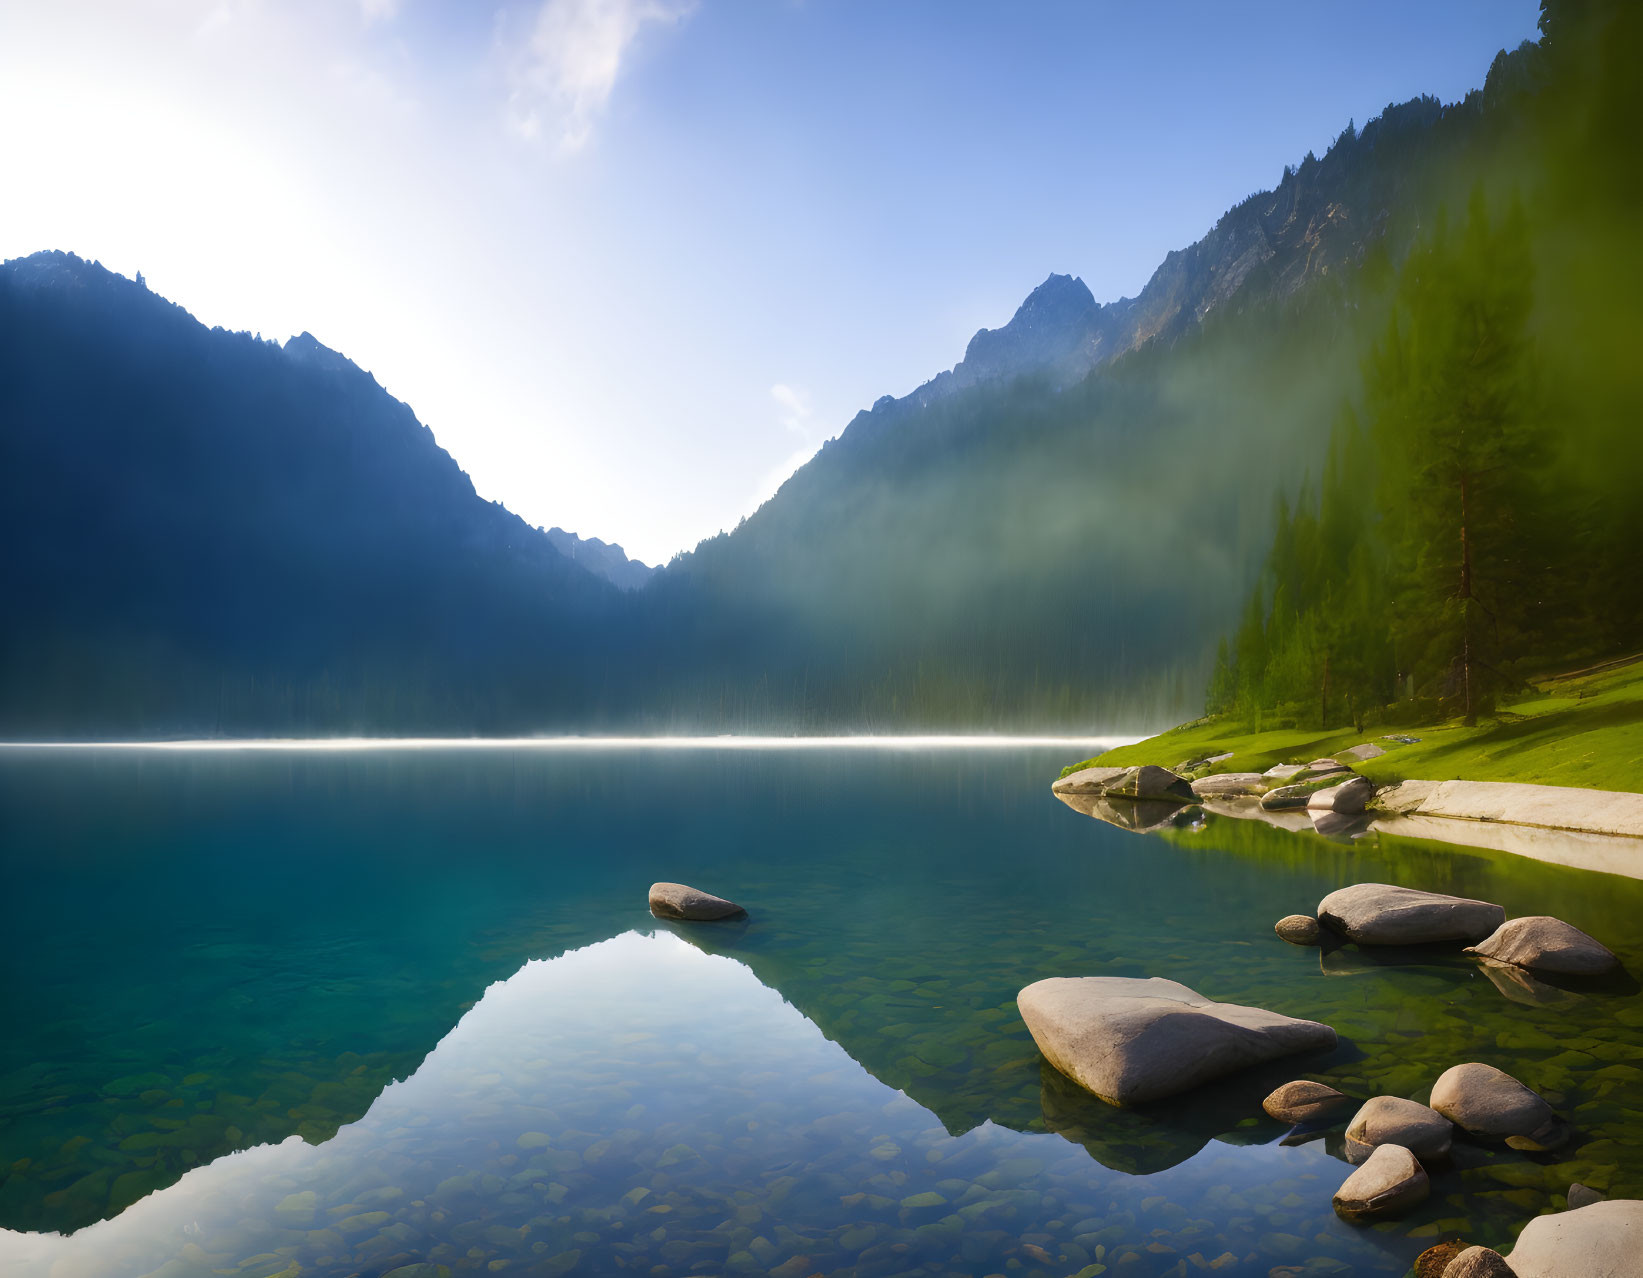 Tranquil mountain lake with forested slopes and rocky shores